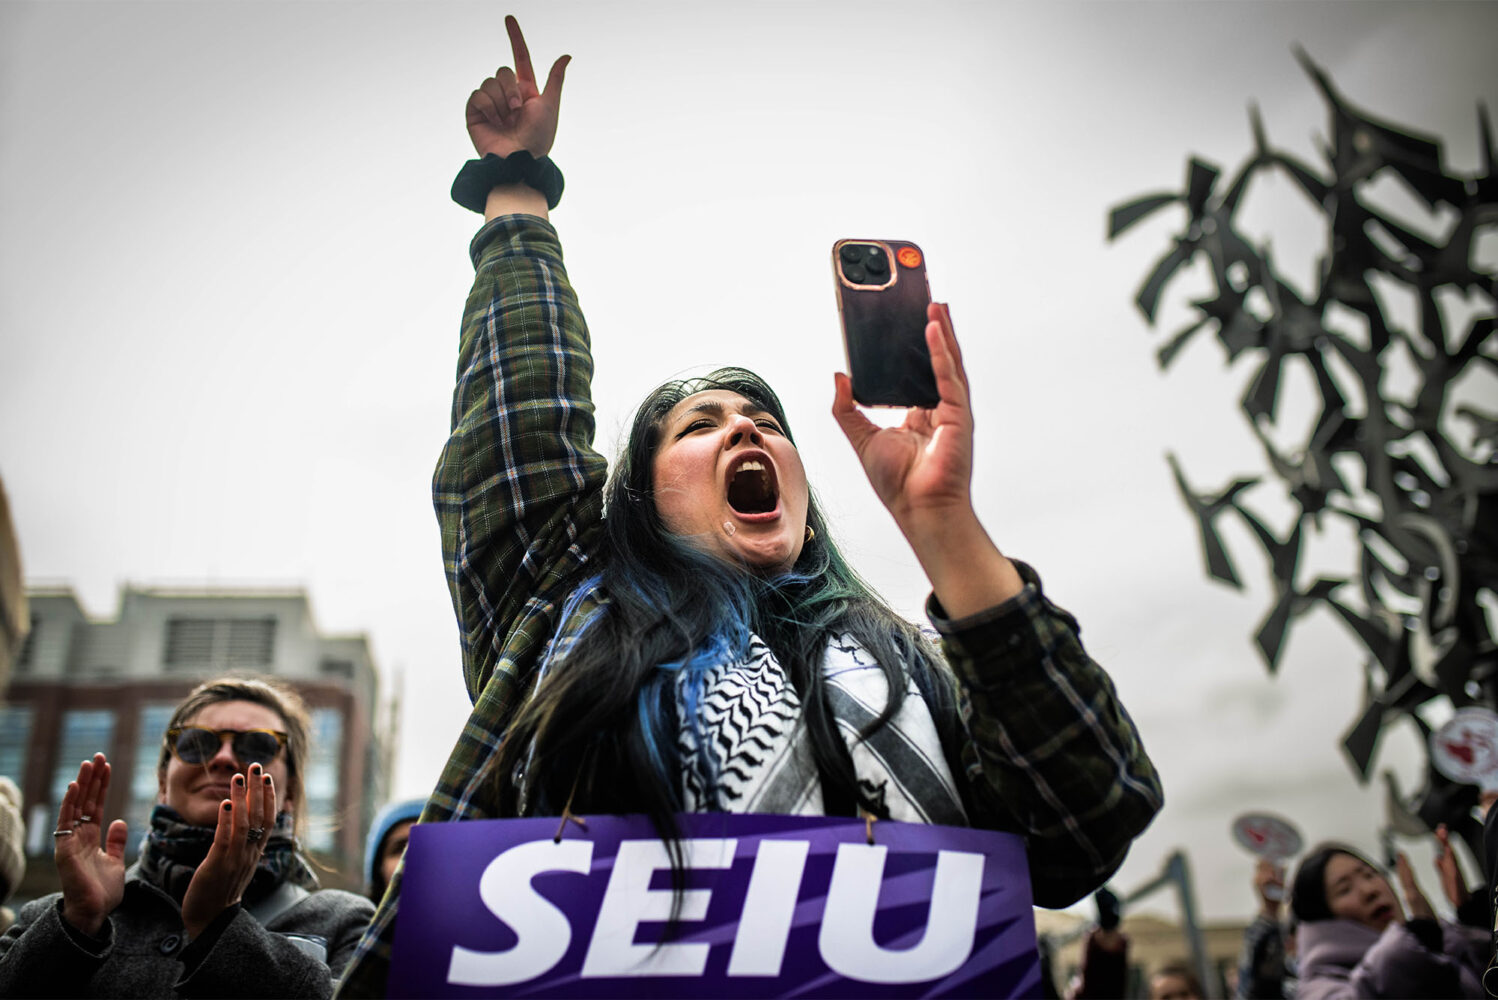 Photo: A graduate student at Boston University holds up a sign reading "SEIU" at a recent strike on Boston University's campus.